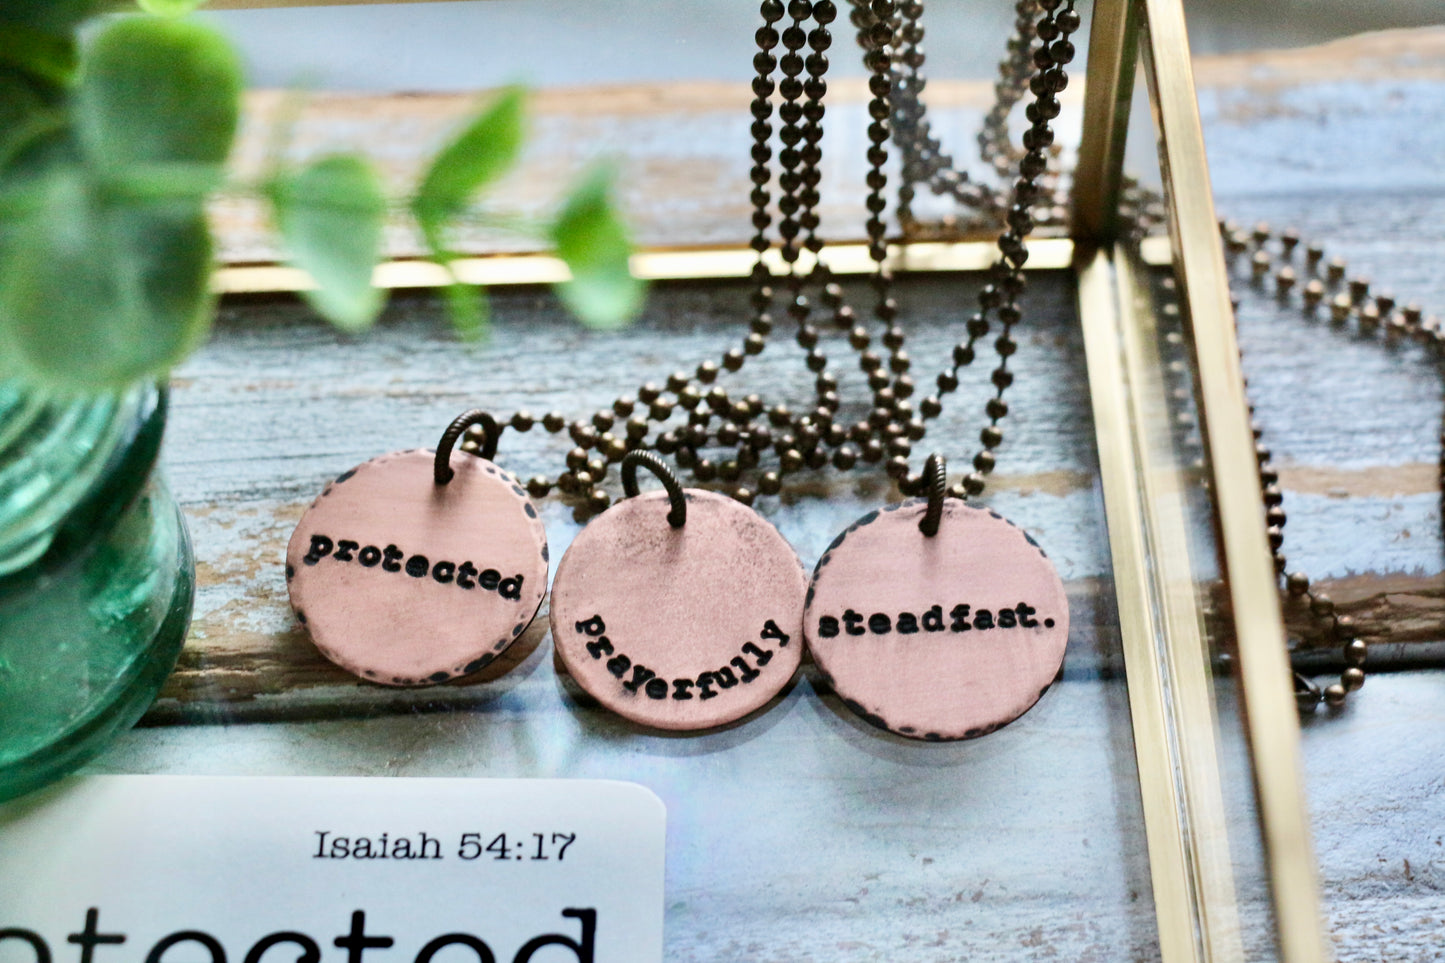 LARGE ROUND custom OLW hand-stamped copper necklace with mini flashcard